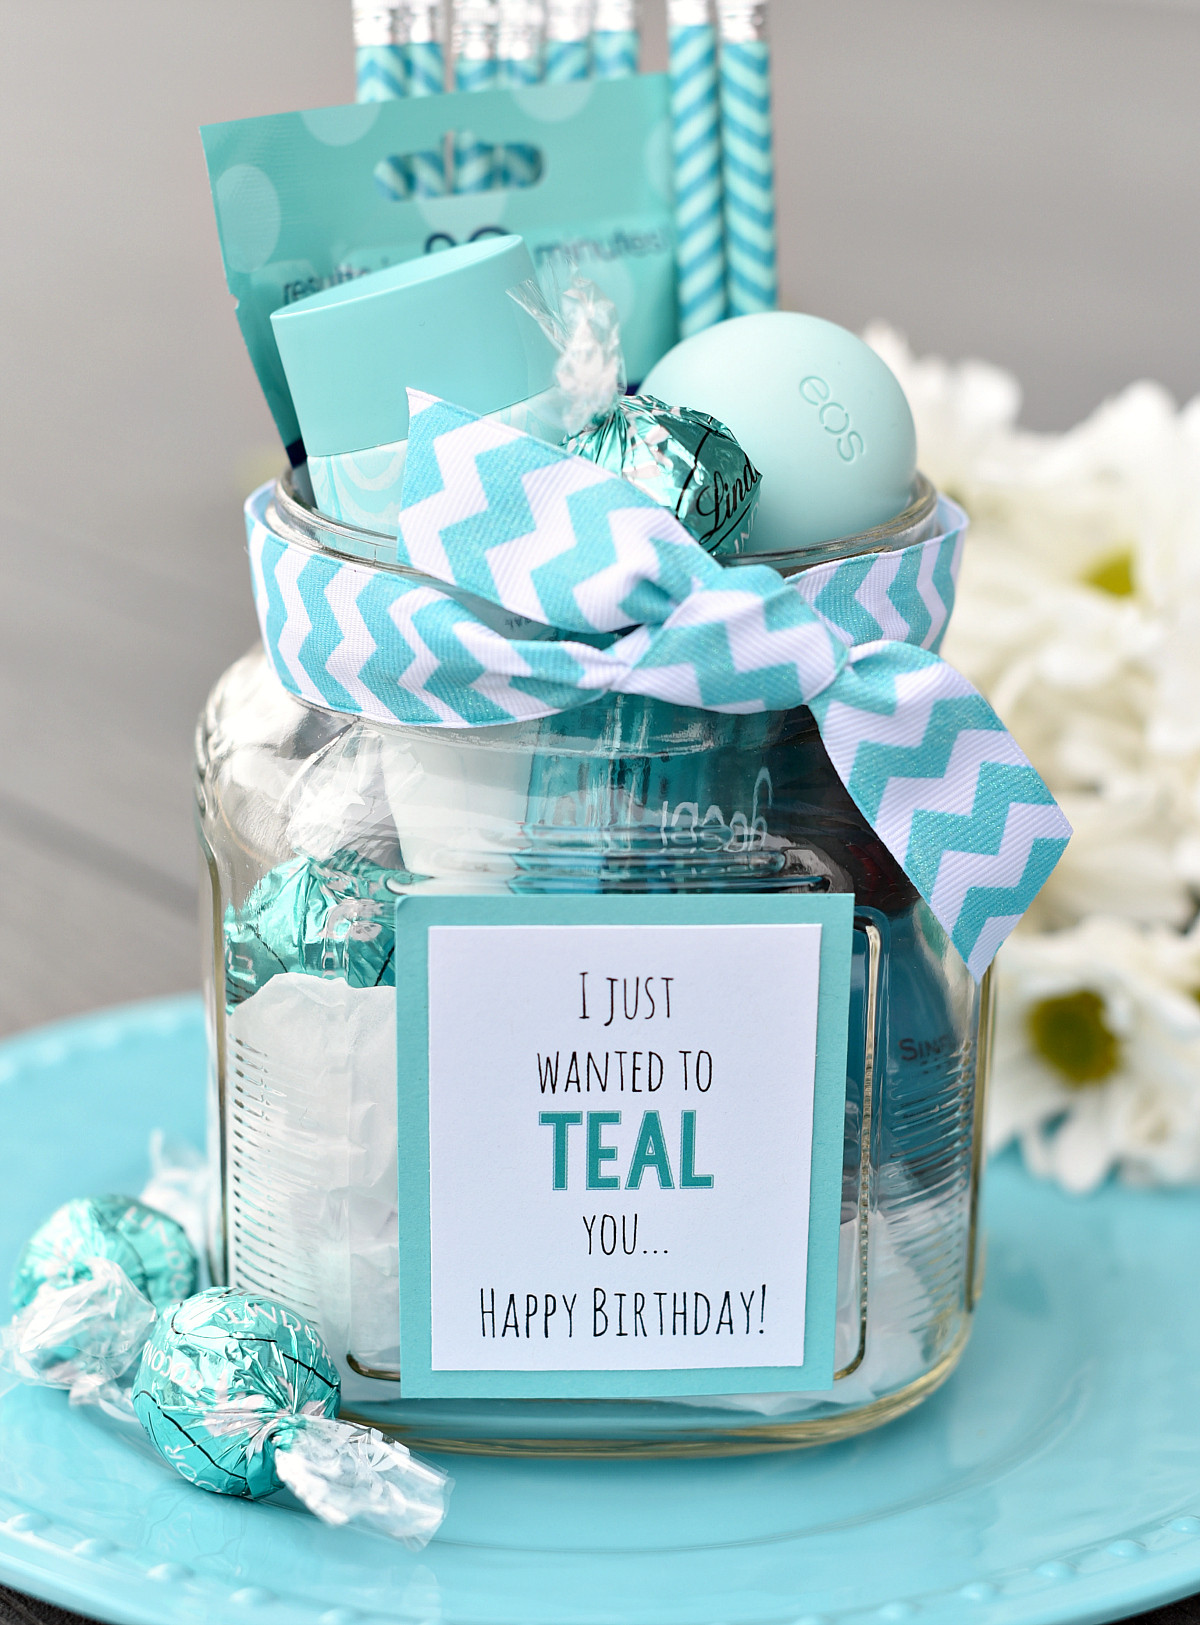 Bday Gift Ideas For Best Friend
 Teal Birthday Gift Idea for Friends – Fun Squared